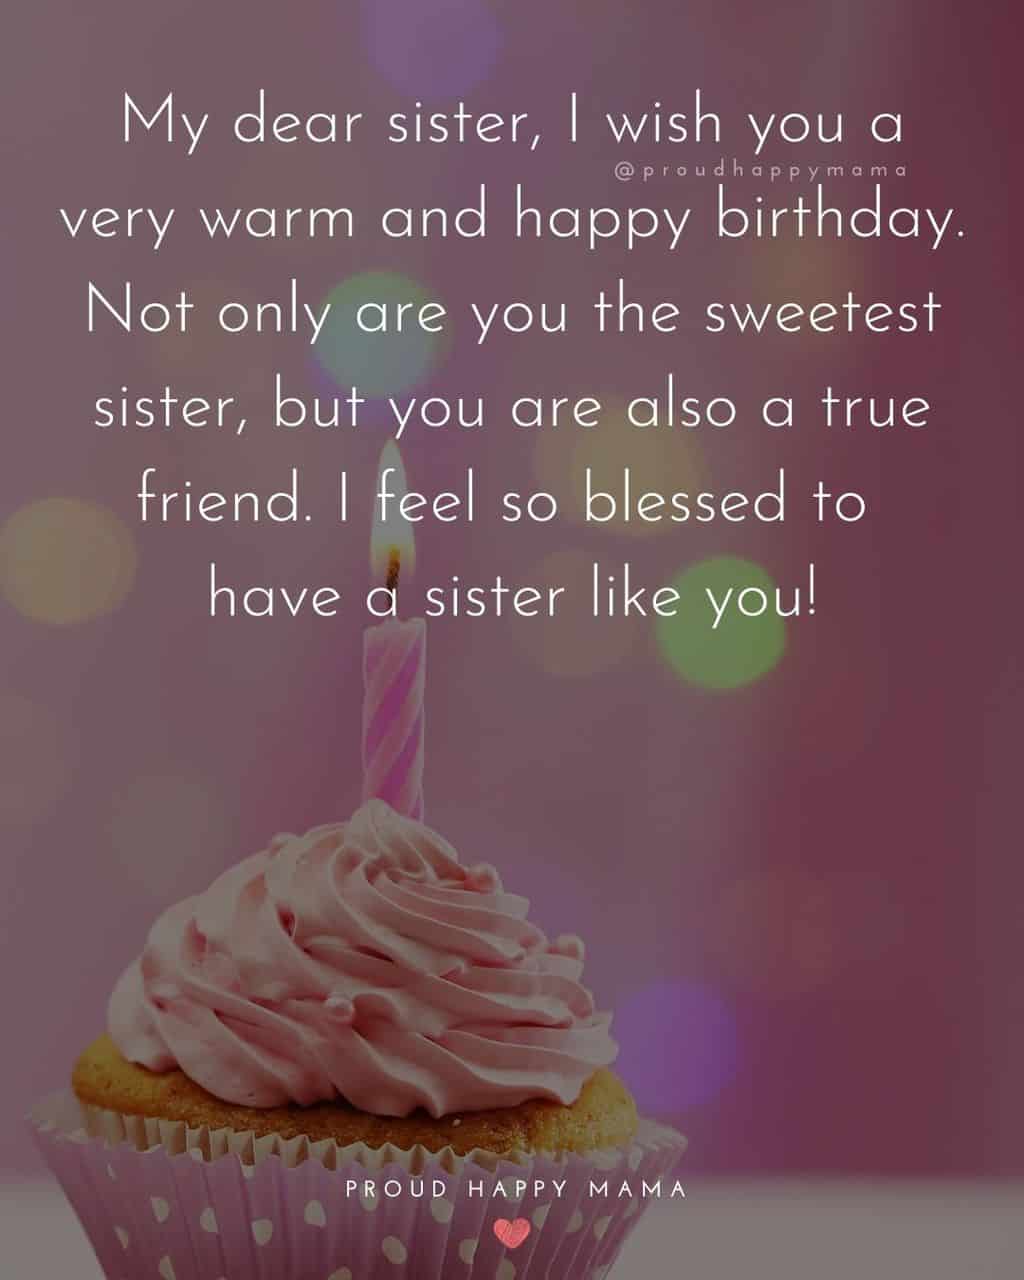 200+ BEST Happy Birthday Wishes For Sister For Her Special Day